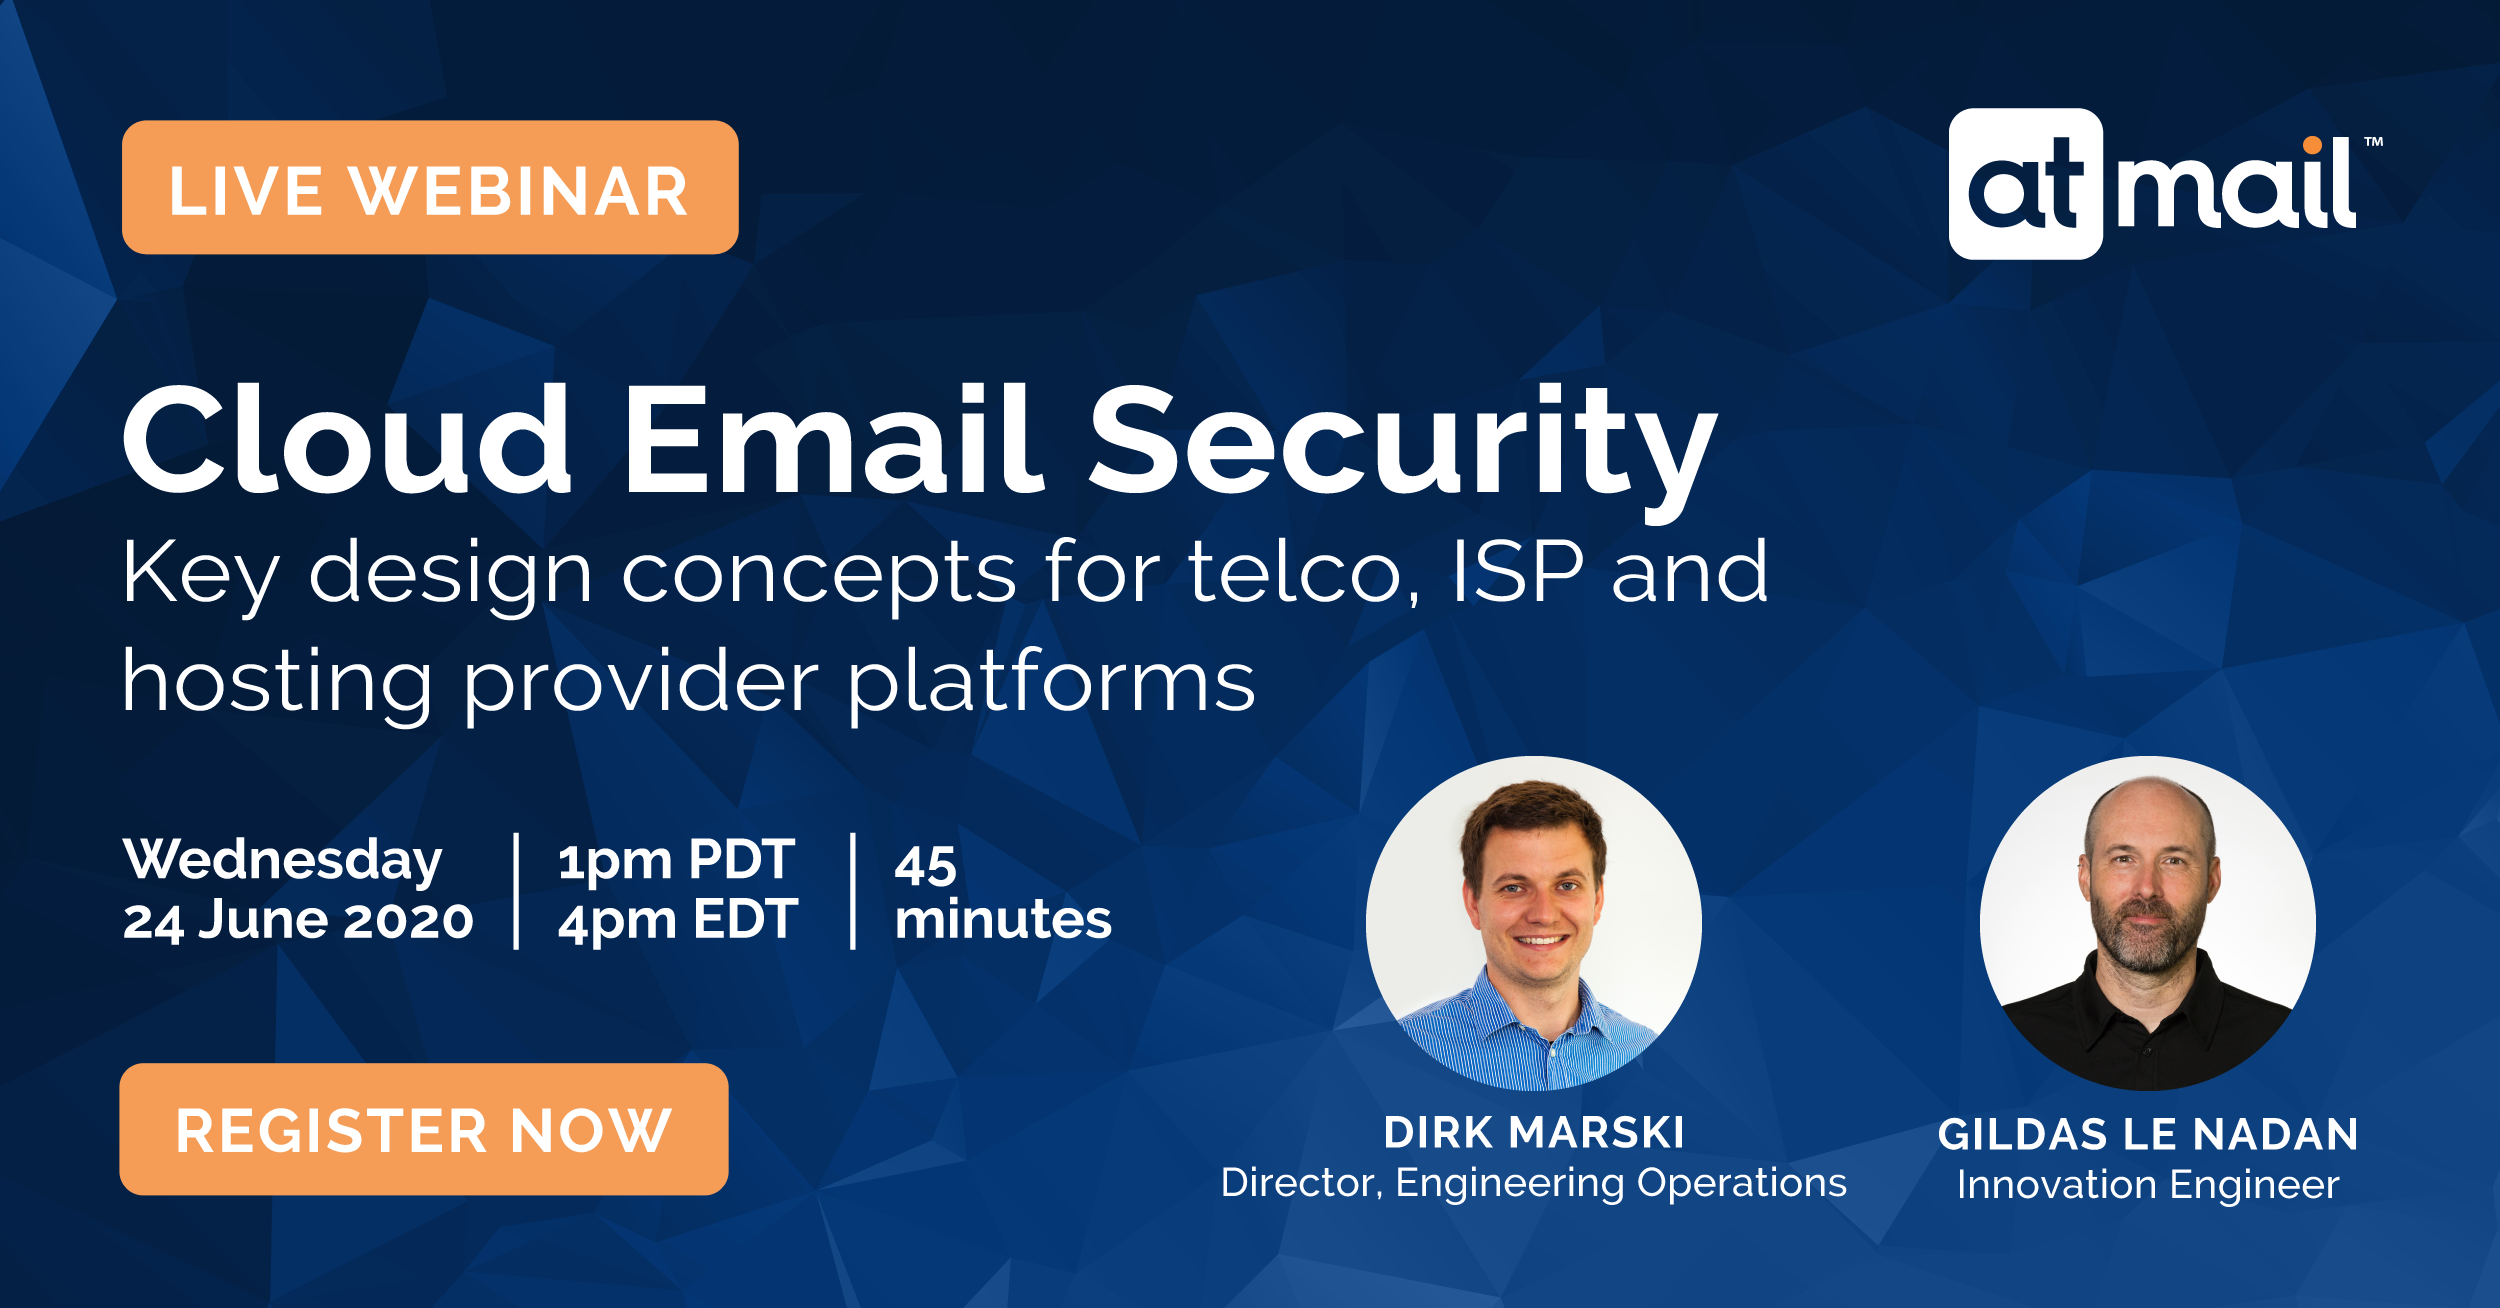 Cloud Email Security - atmail webinar, Dirk Marski, Gildas Le Nadan, cloud hosted email, email hosting for telcos, ISPs and hosting providers